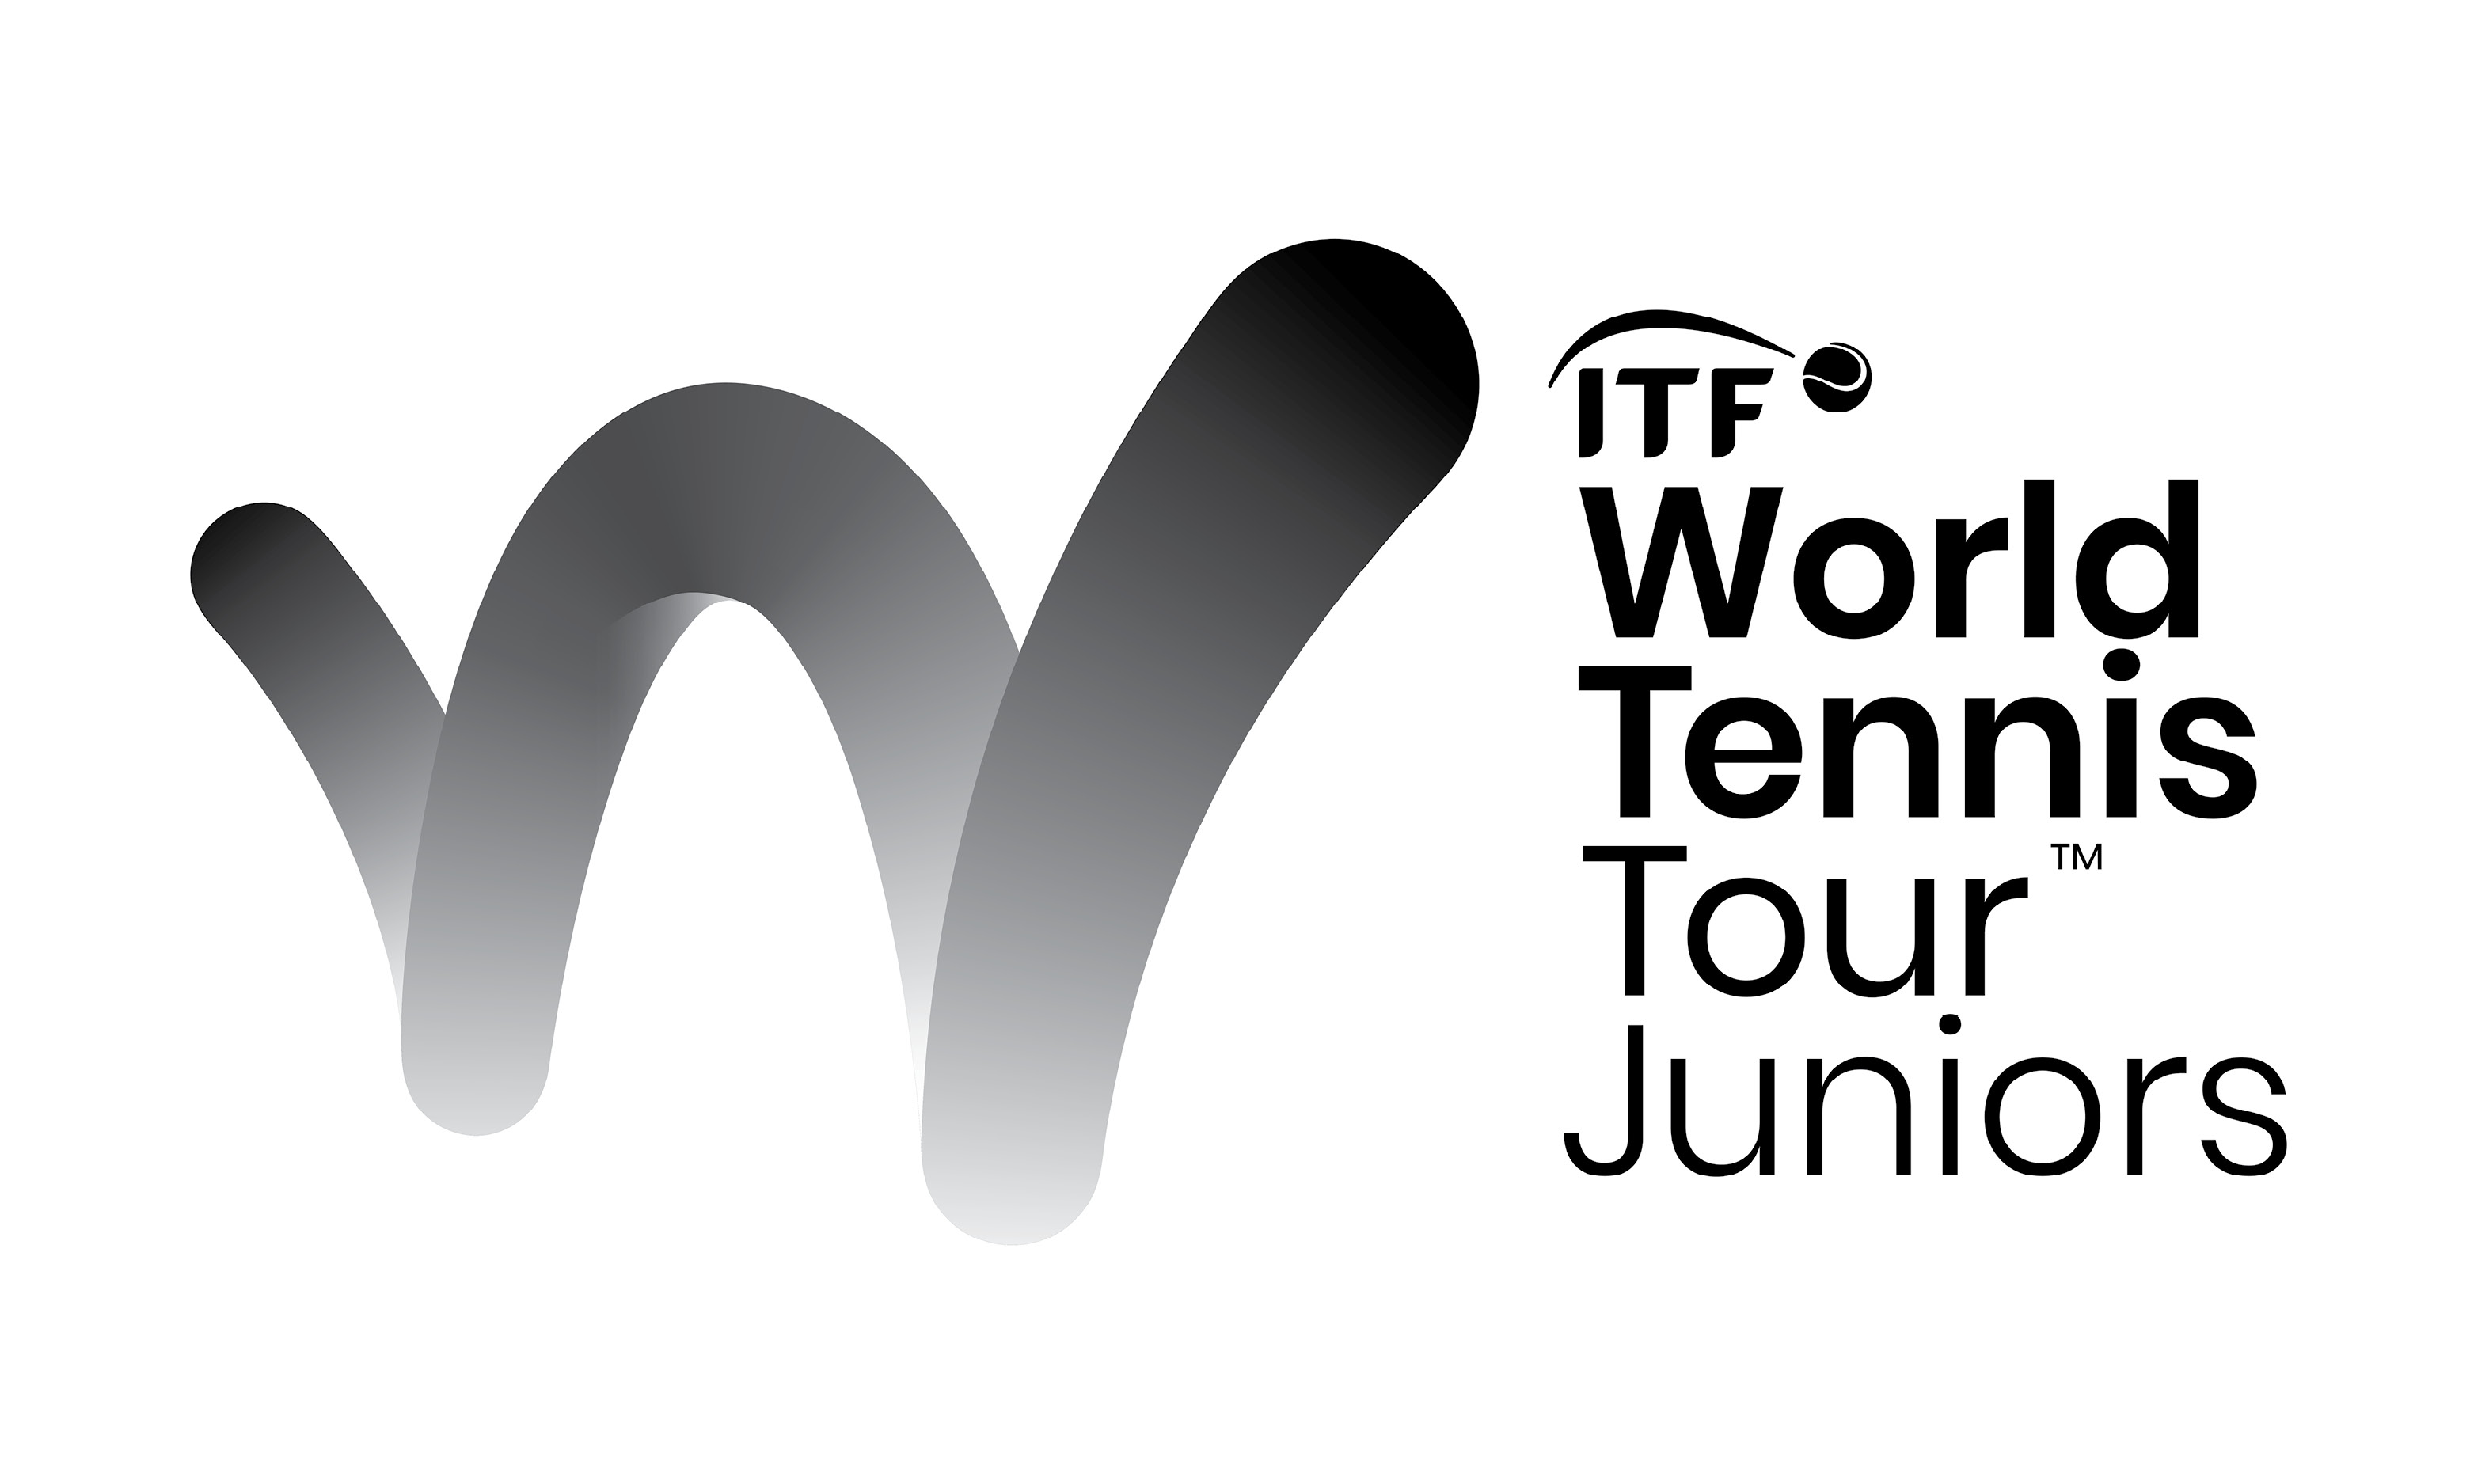 ITF World Tennis Tour Junior tournaments underway at The Drive 4